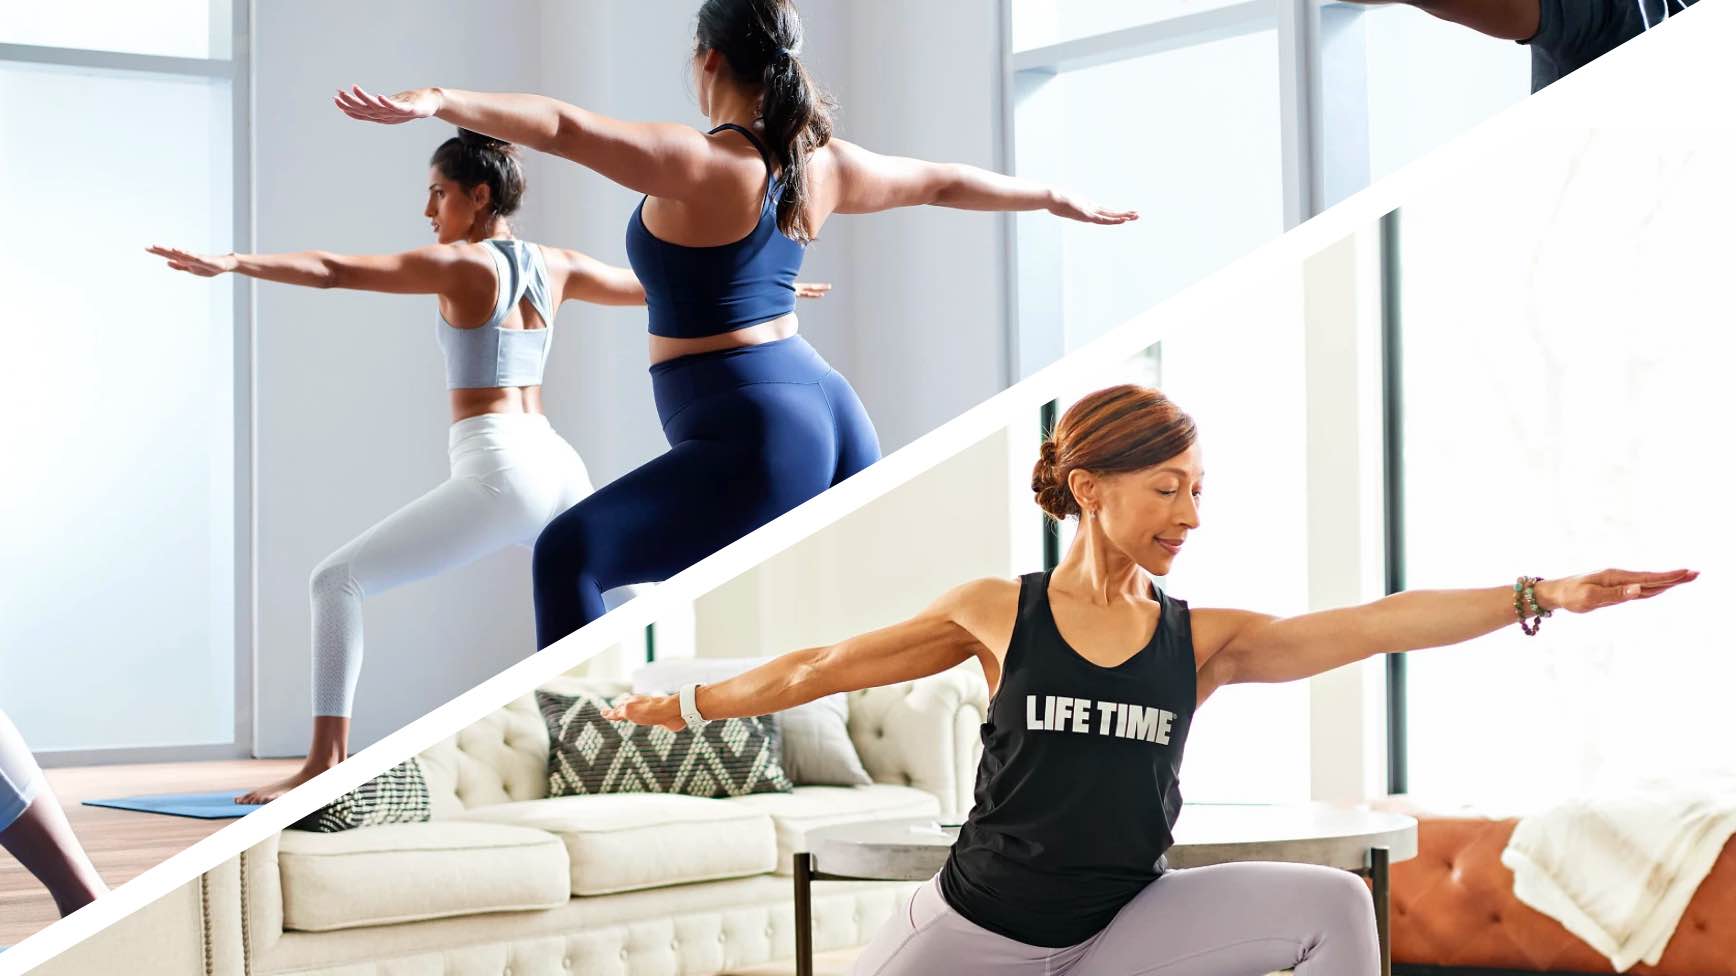 Split image of women doing yoga in a studio and a woman taking an on demand class at home with Life Time